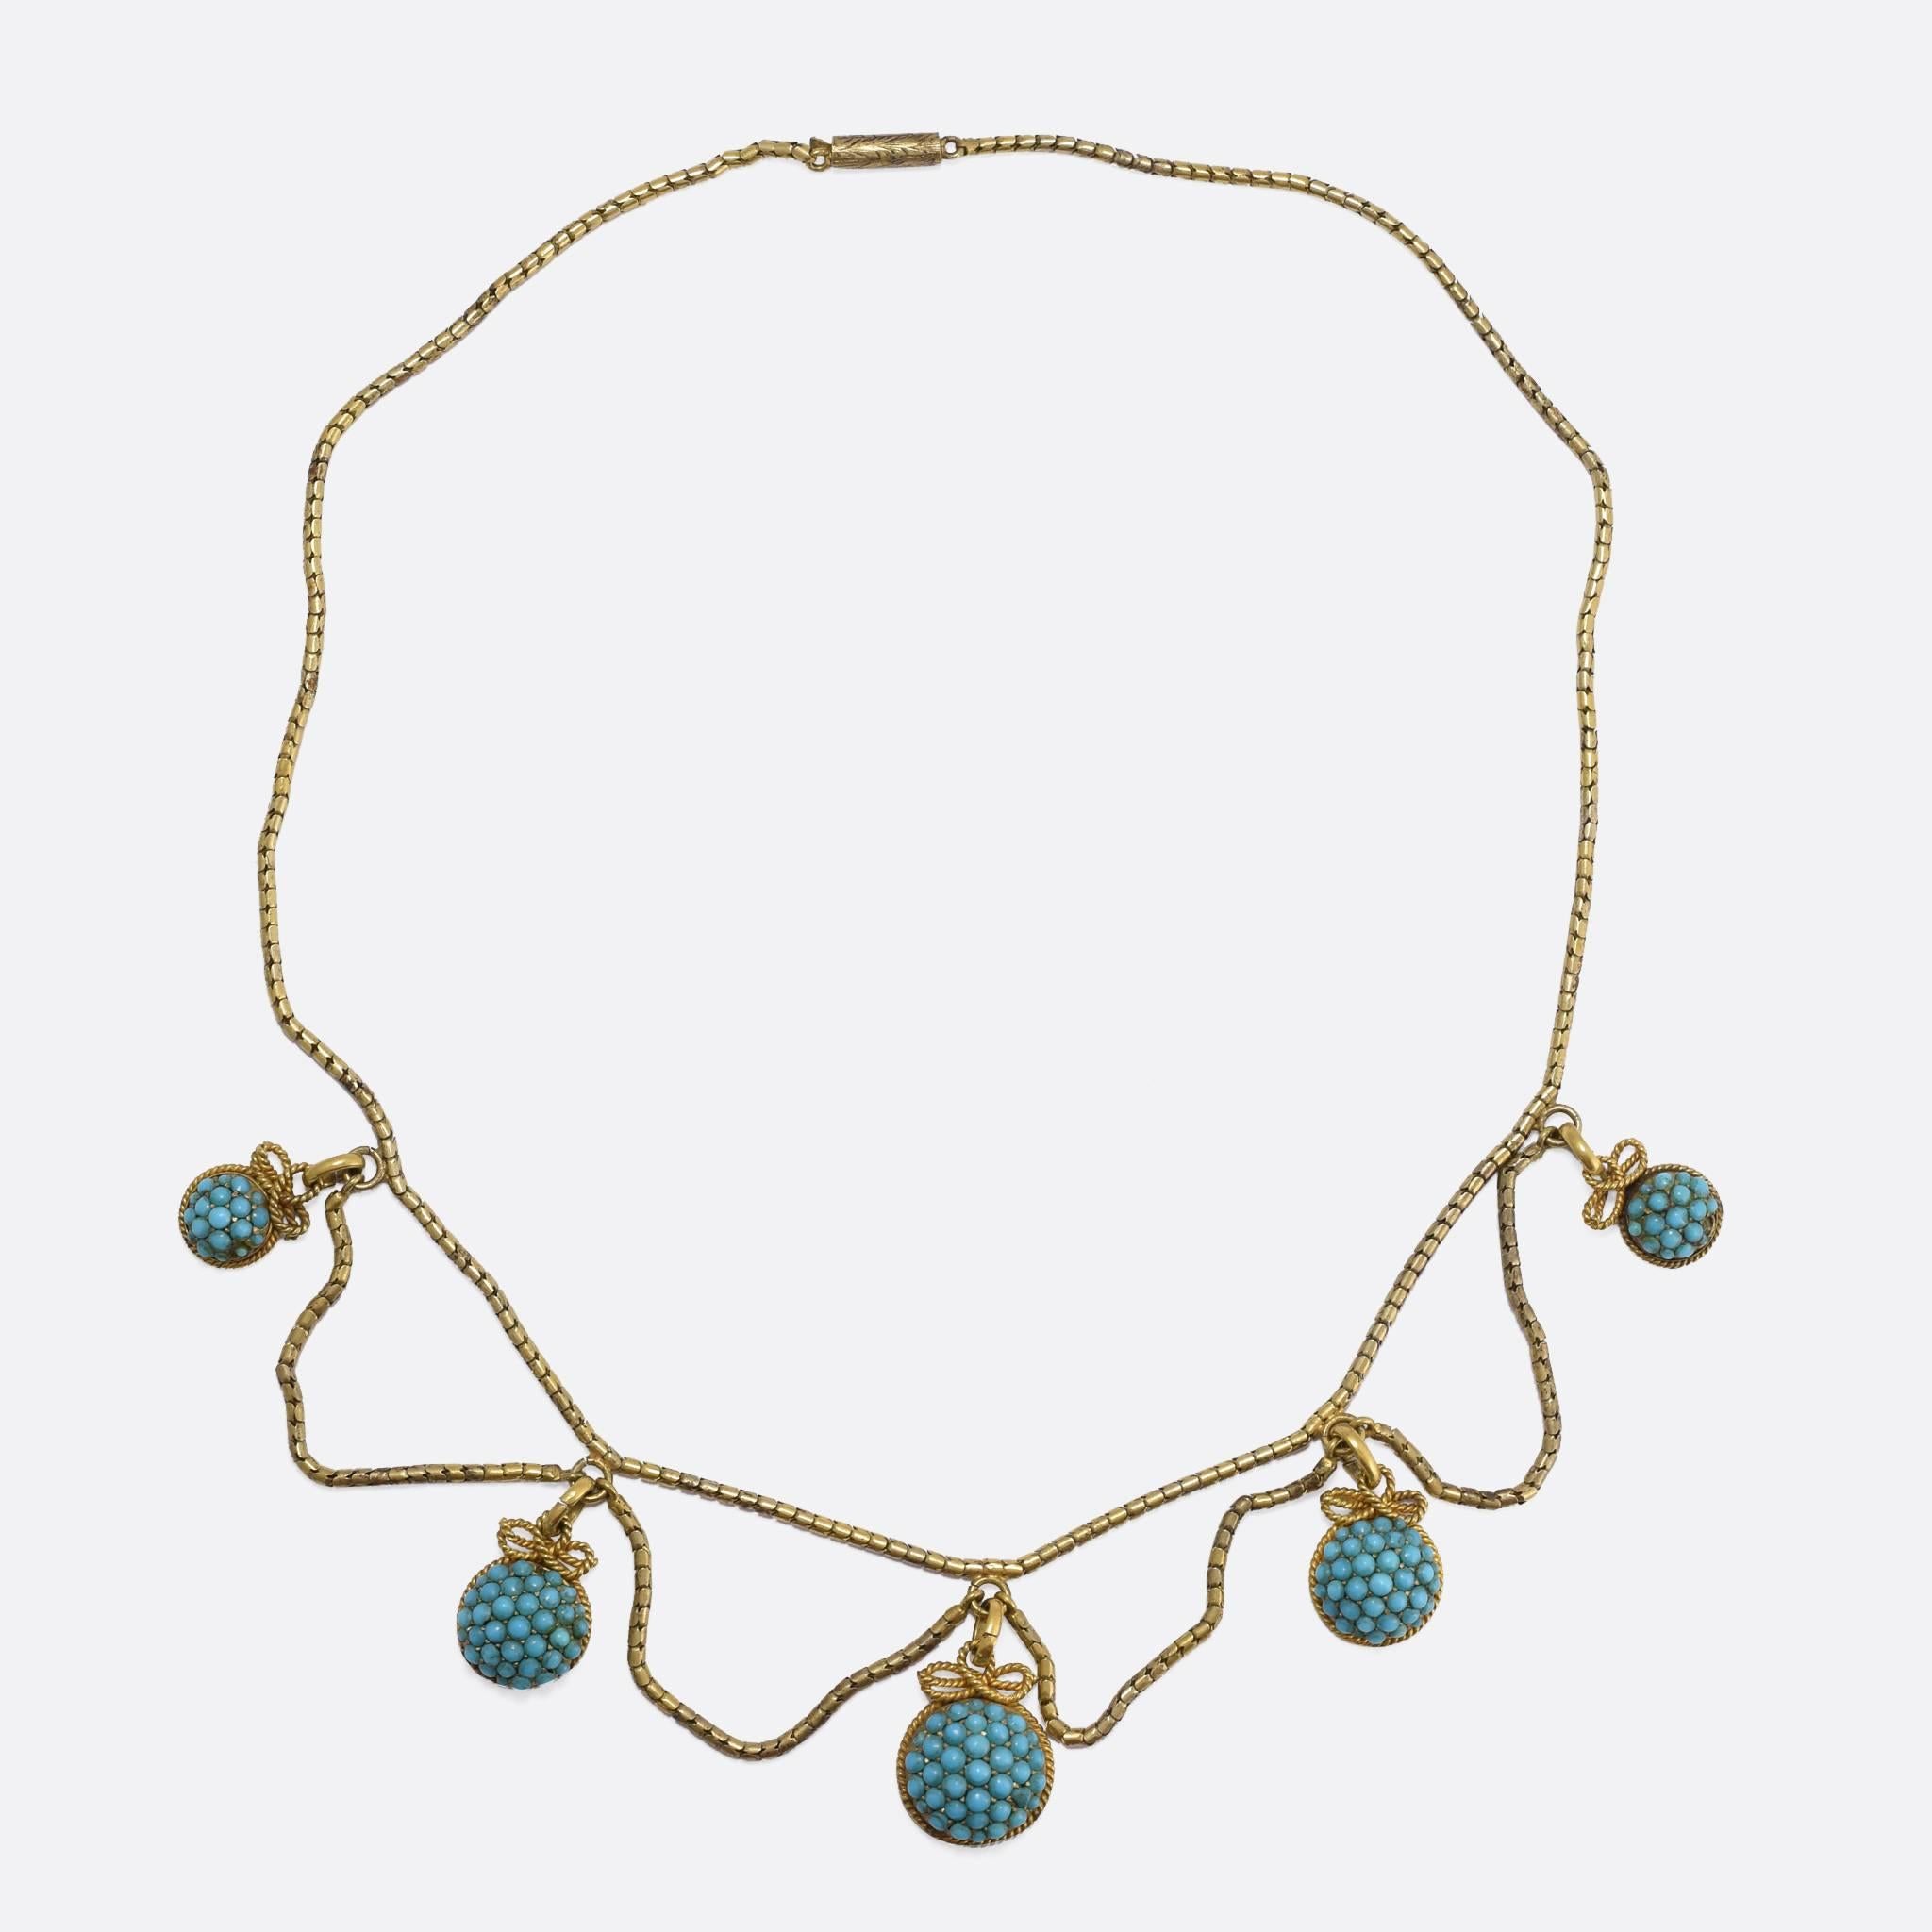 This elegant Victorian necklace is made in the Etruscan Revival style. It features five graduated drops, each pavé set with tiny turquoise cabochons, and finished in applied ropework detail. The Etruscan Revivalist movement began in the mid 19th